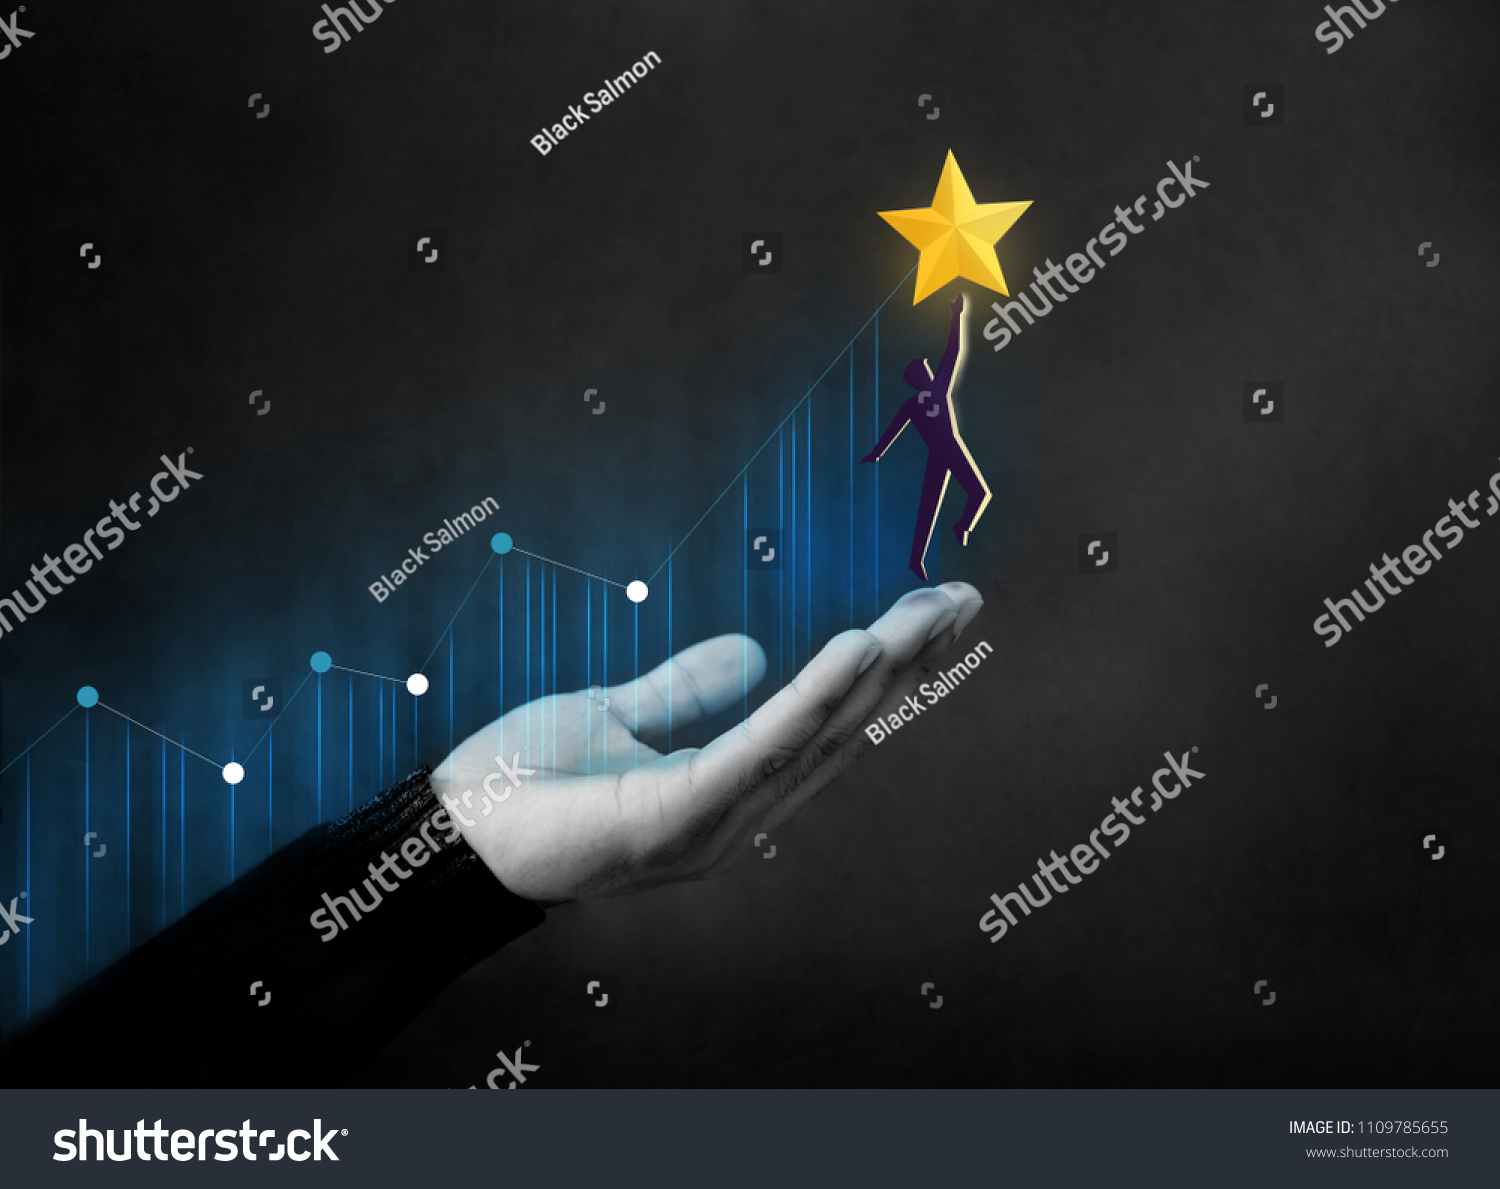 Customer Journey or Business Success Concept. Hand Raised and Support Human Shape with Care to Reach a Golden Star, Diagram Graph as background #1109785655